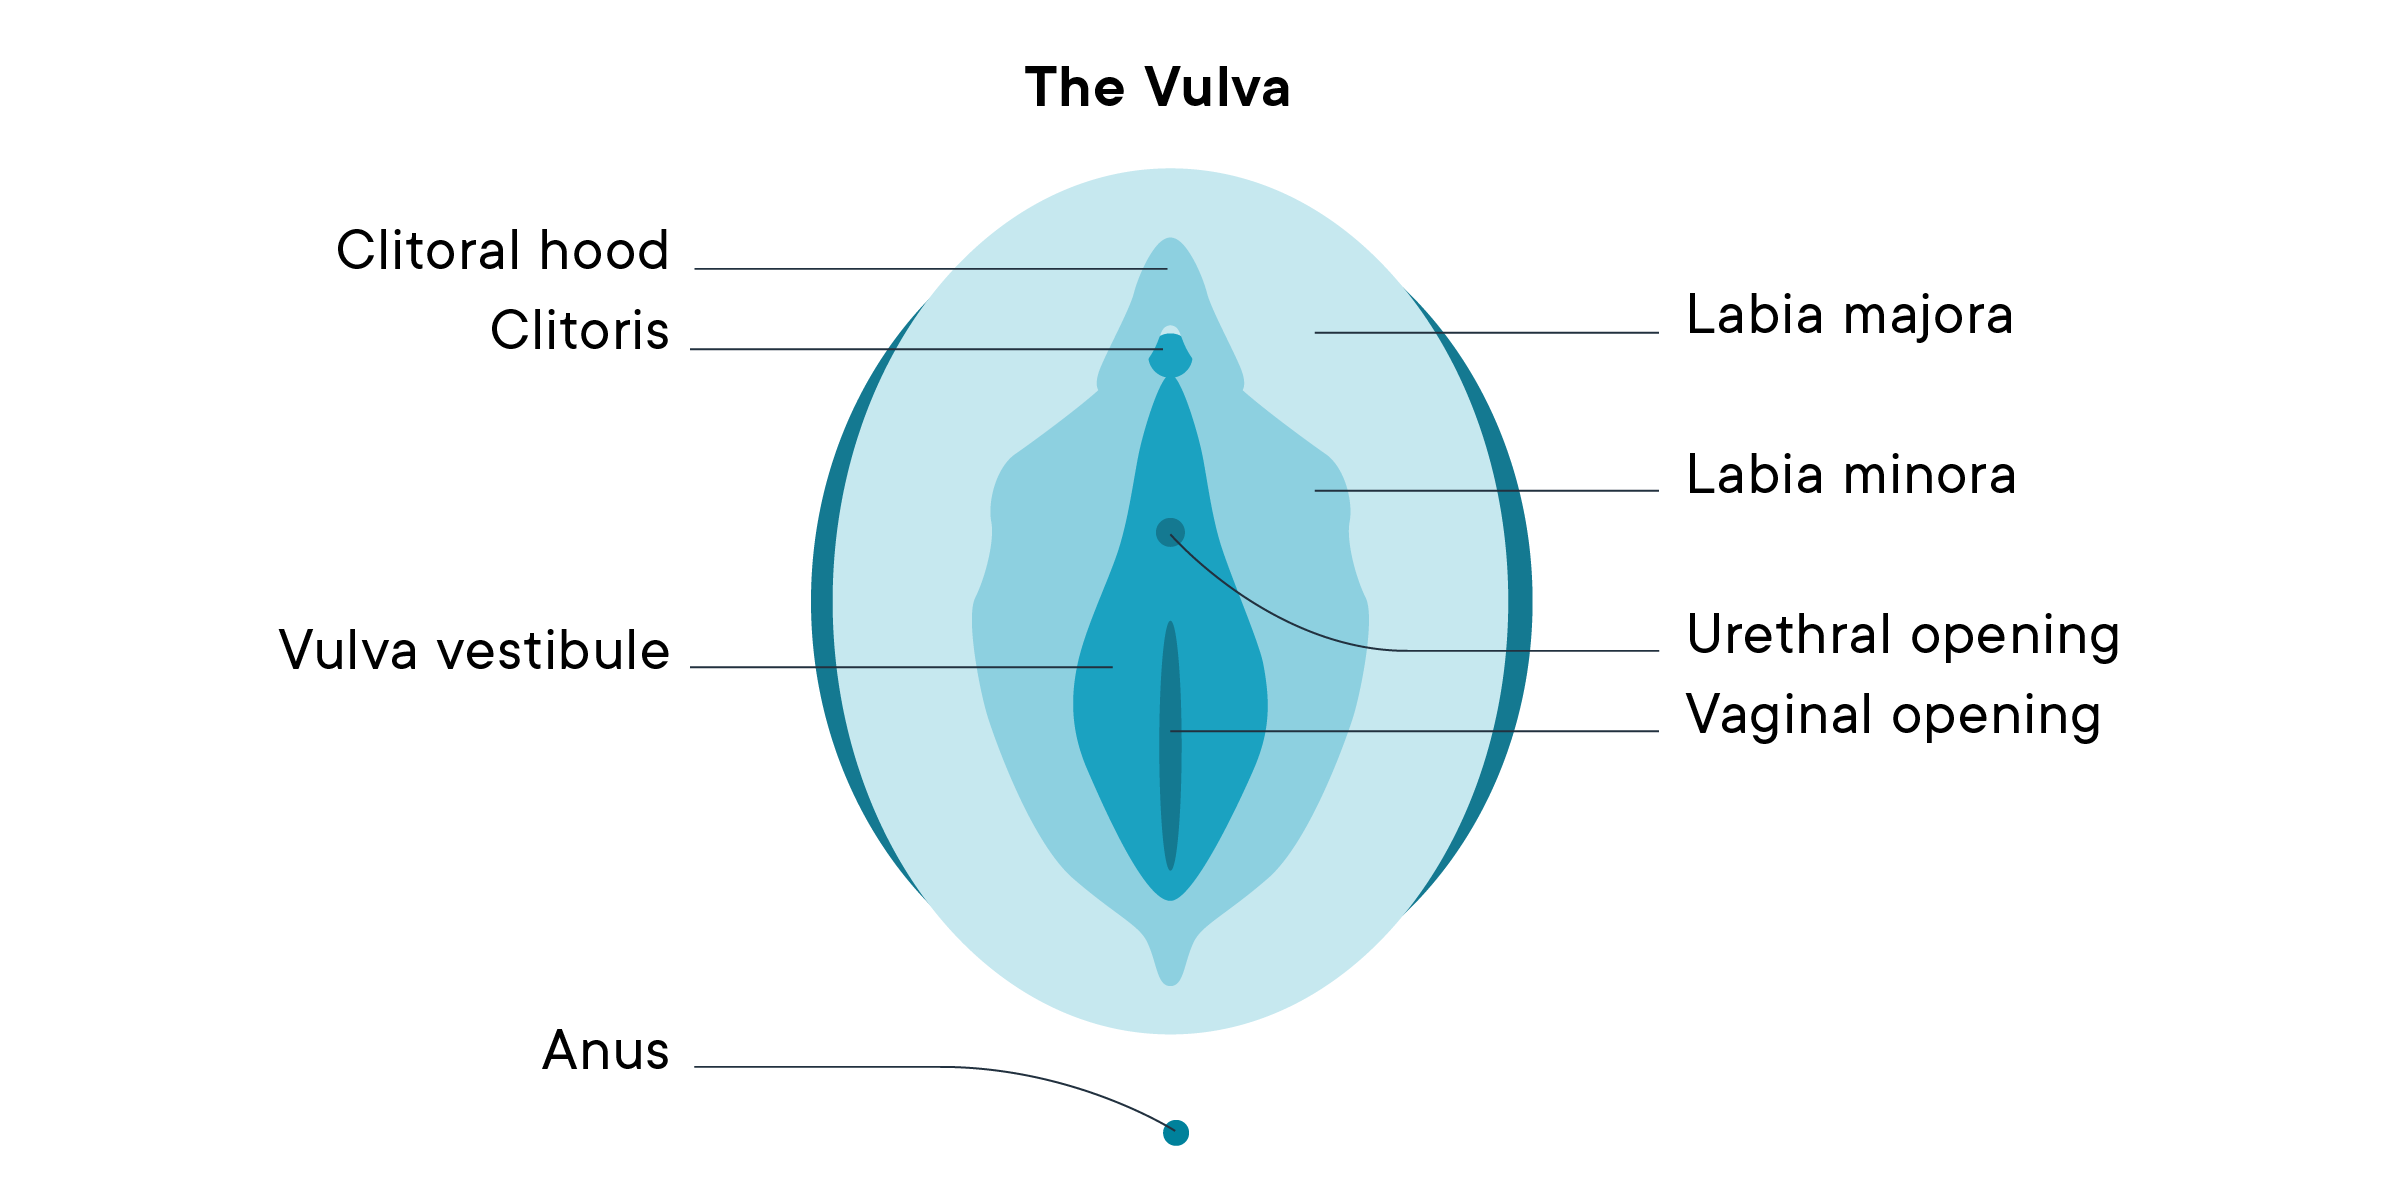 A labeled illustration of the vulva